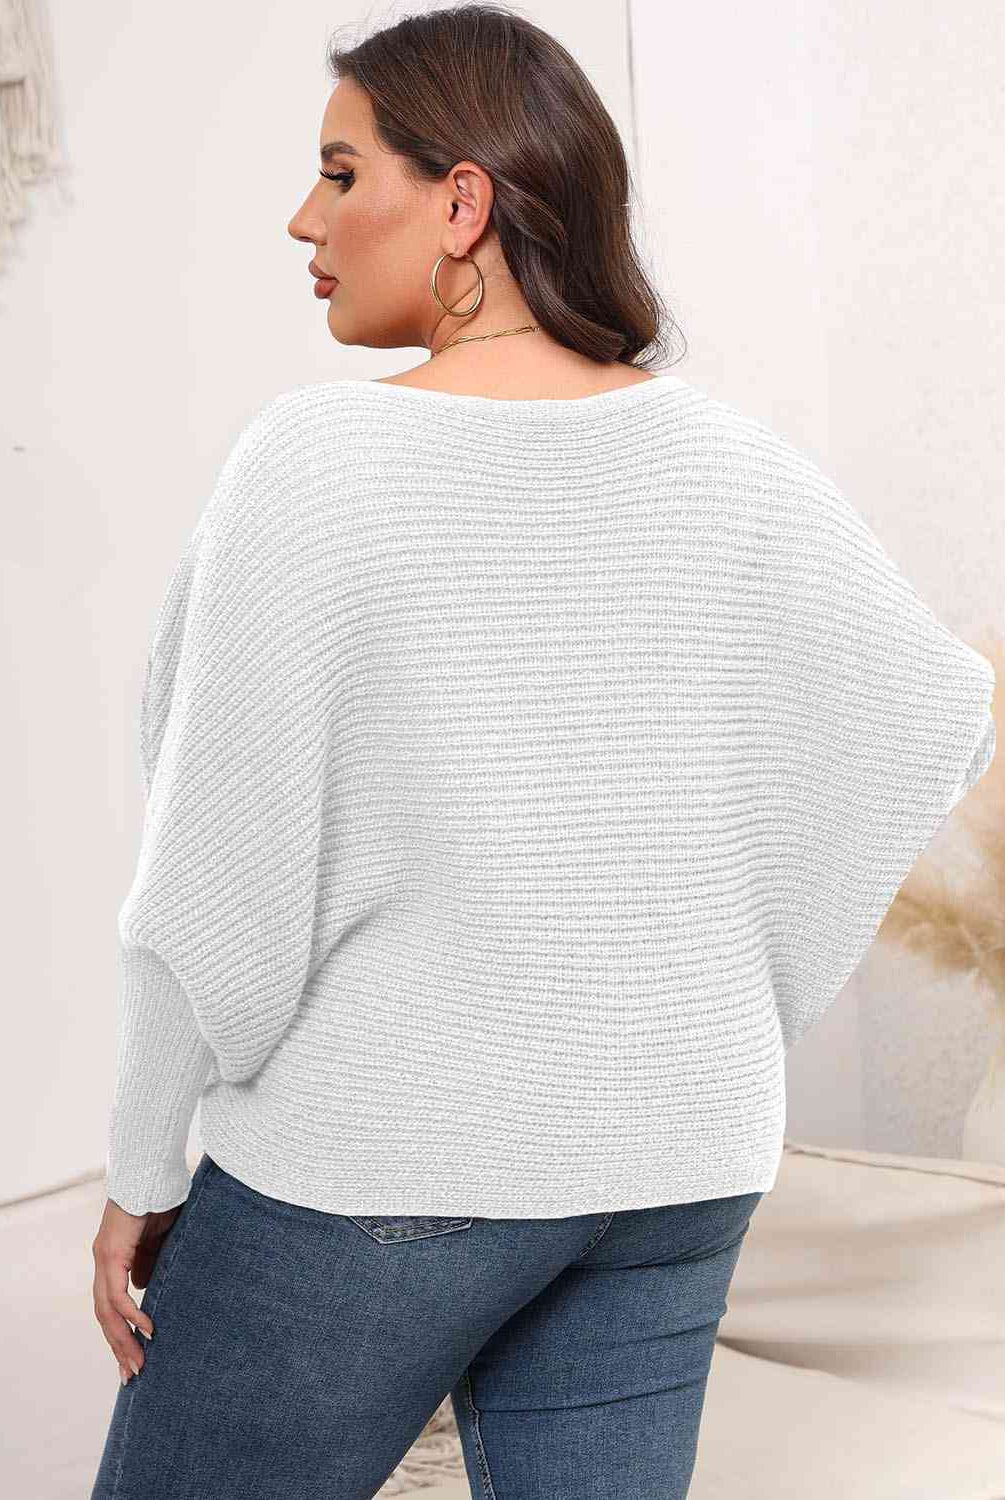 Full Size Boat Neck Batwing Sleeve Sweater - GemThreads Boutique